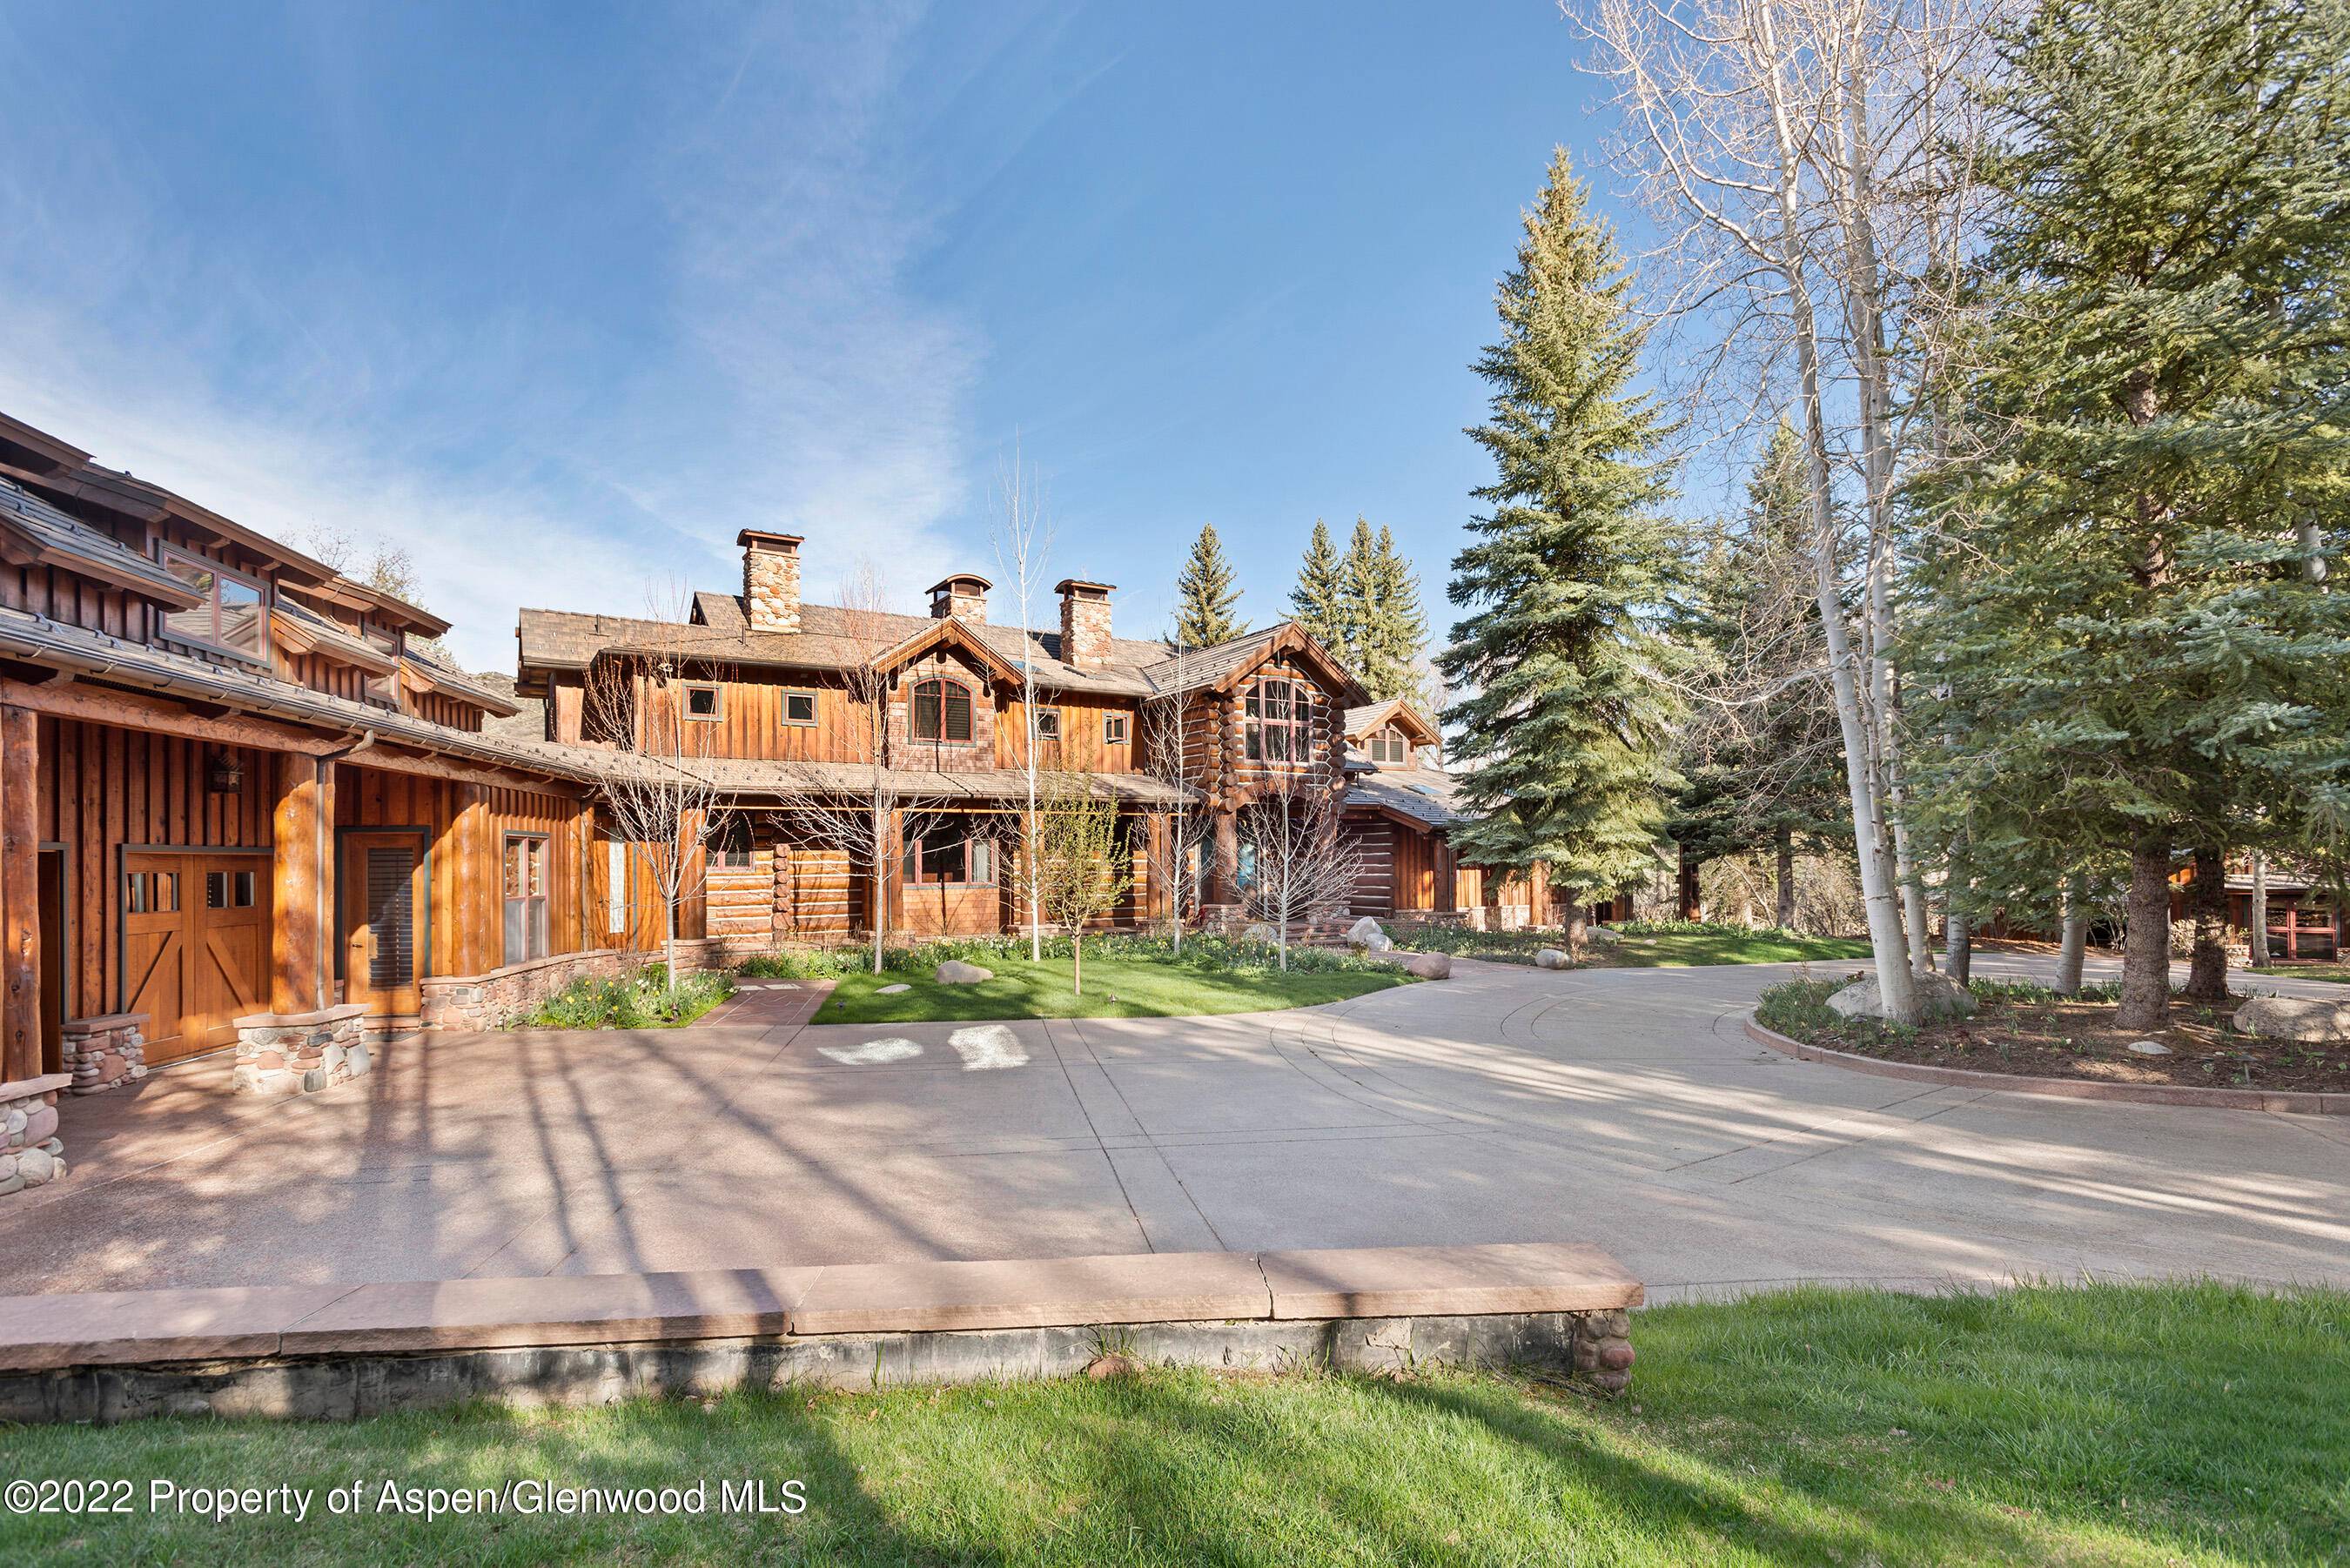 Unique opportunity to experience living in this secluded and luxurious riverfront estate located on the banks 1, 100 feet of the Woody Creek and Roaring Fork River.